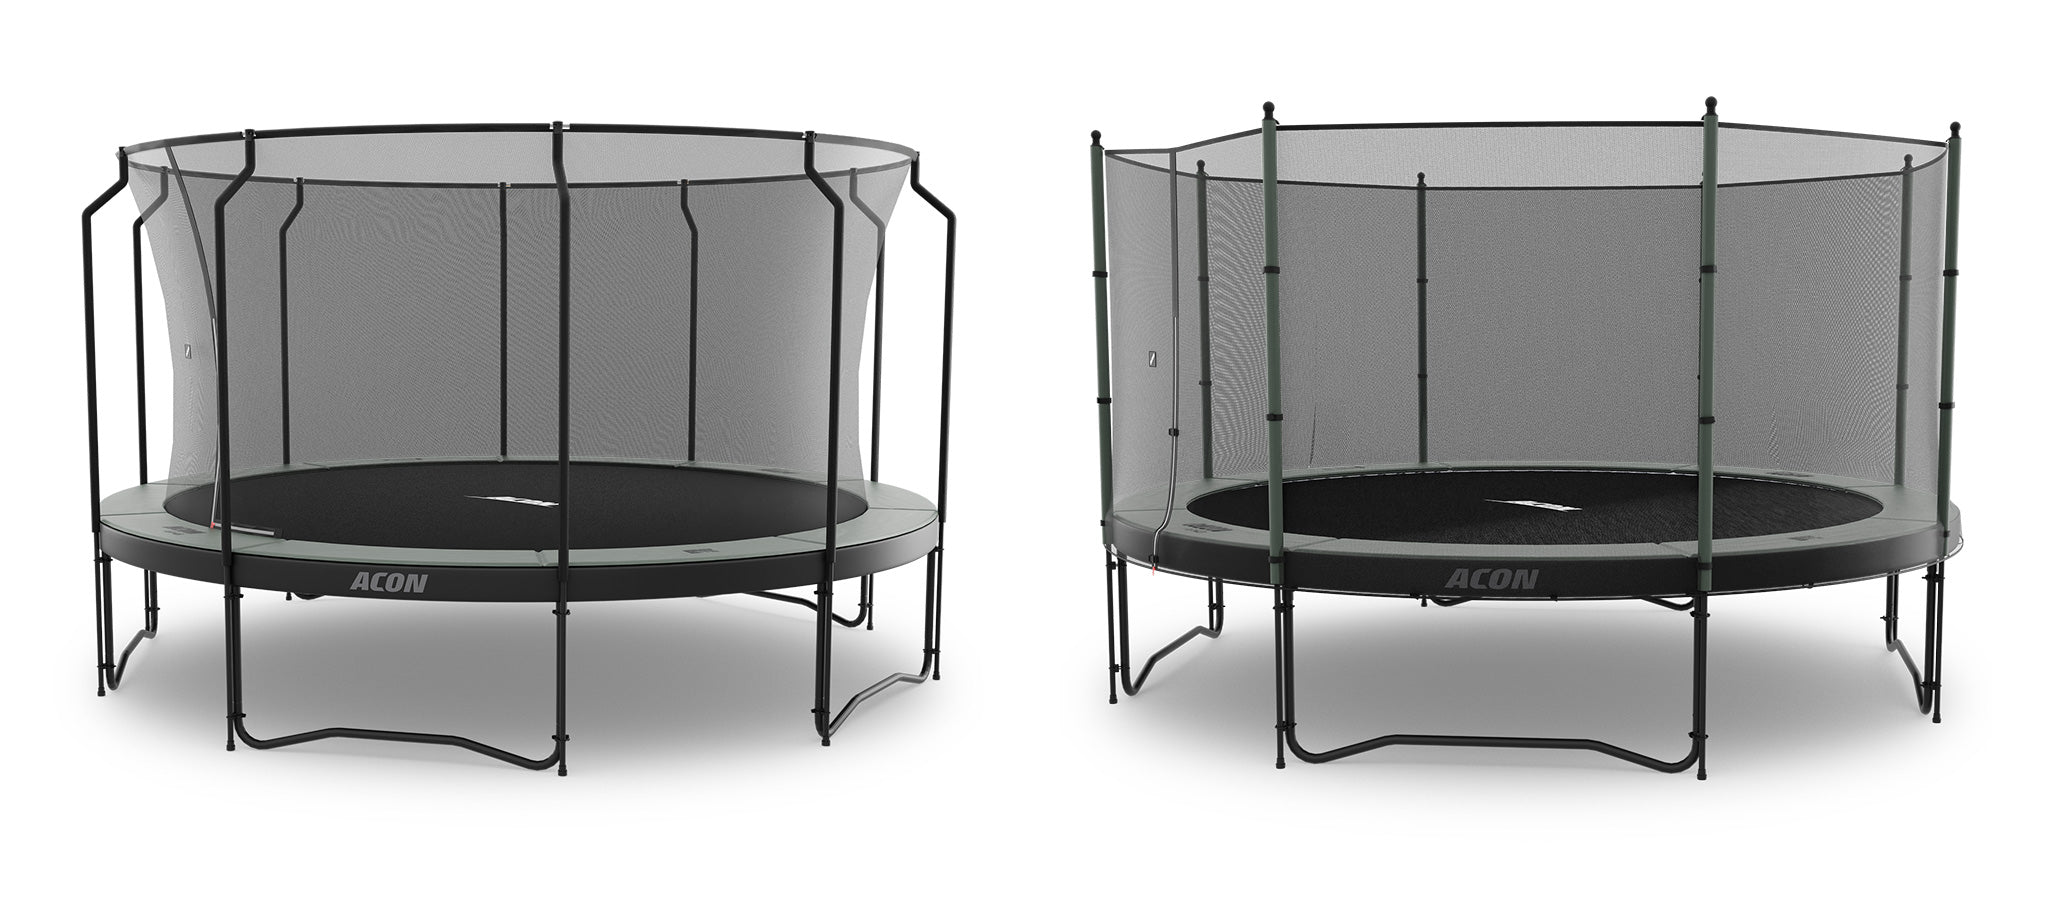 Two ACON 4,6m trampolines with net on a white background. The left trampoline is assembled with a premium enclosure that is assembled inside the springs. The right trampoline has a standard enclosure